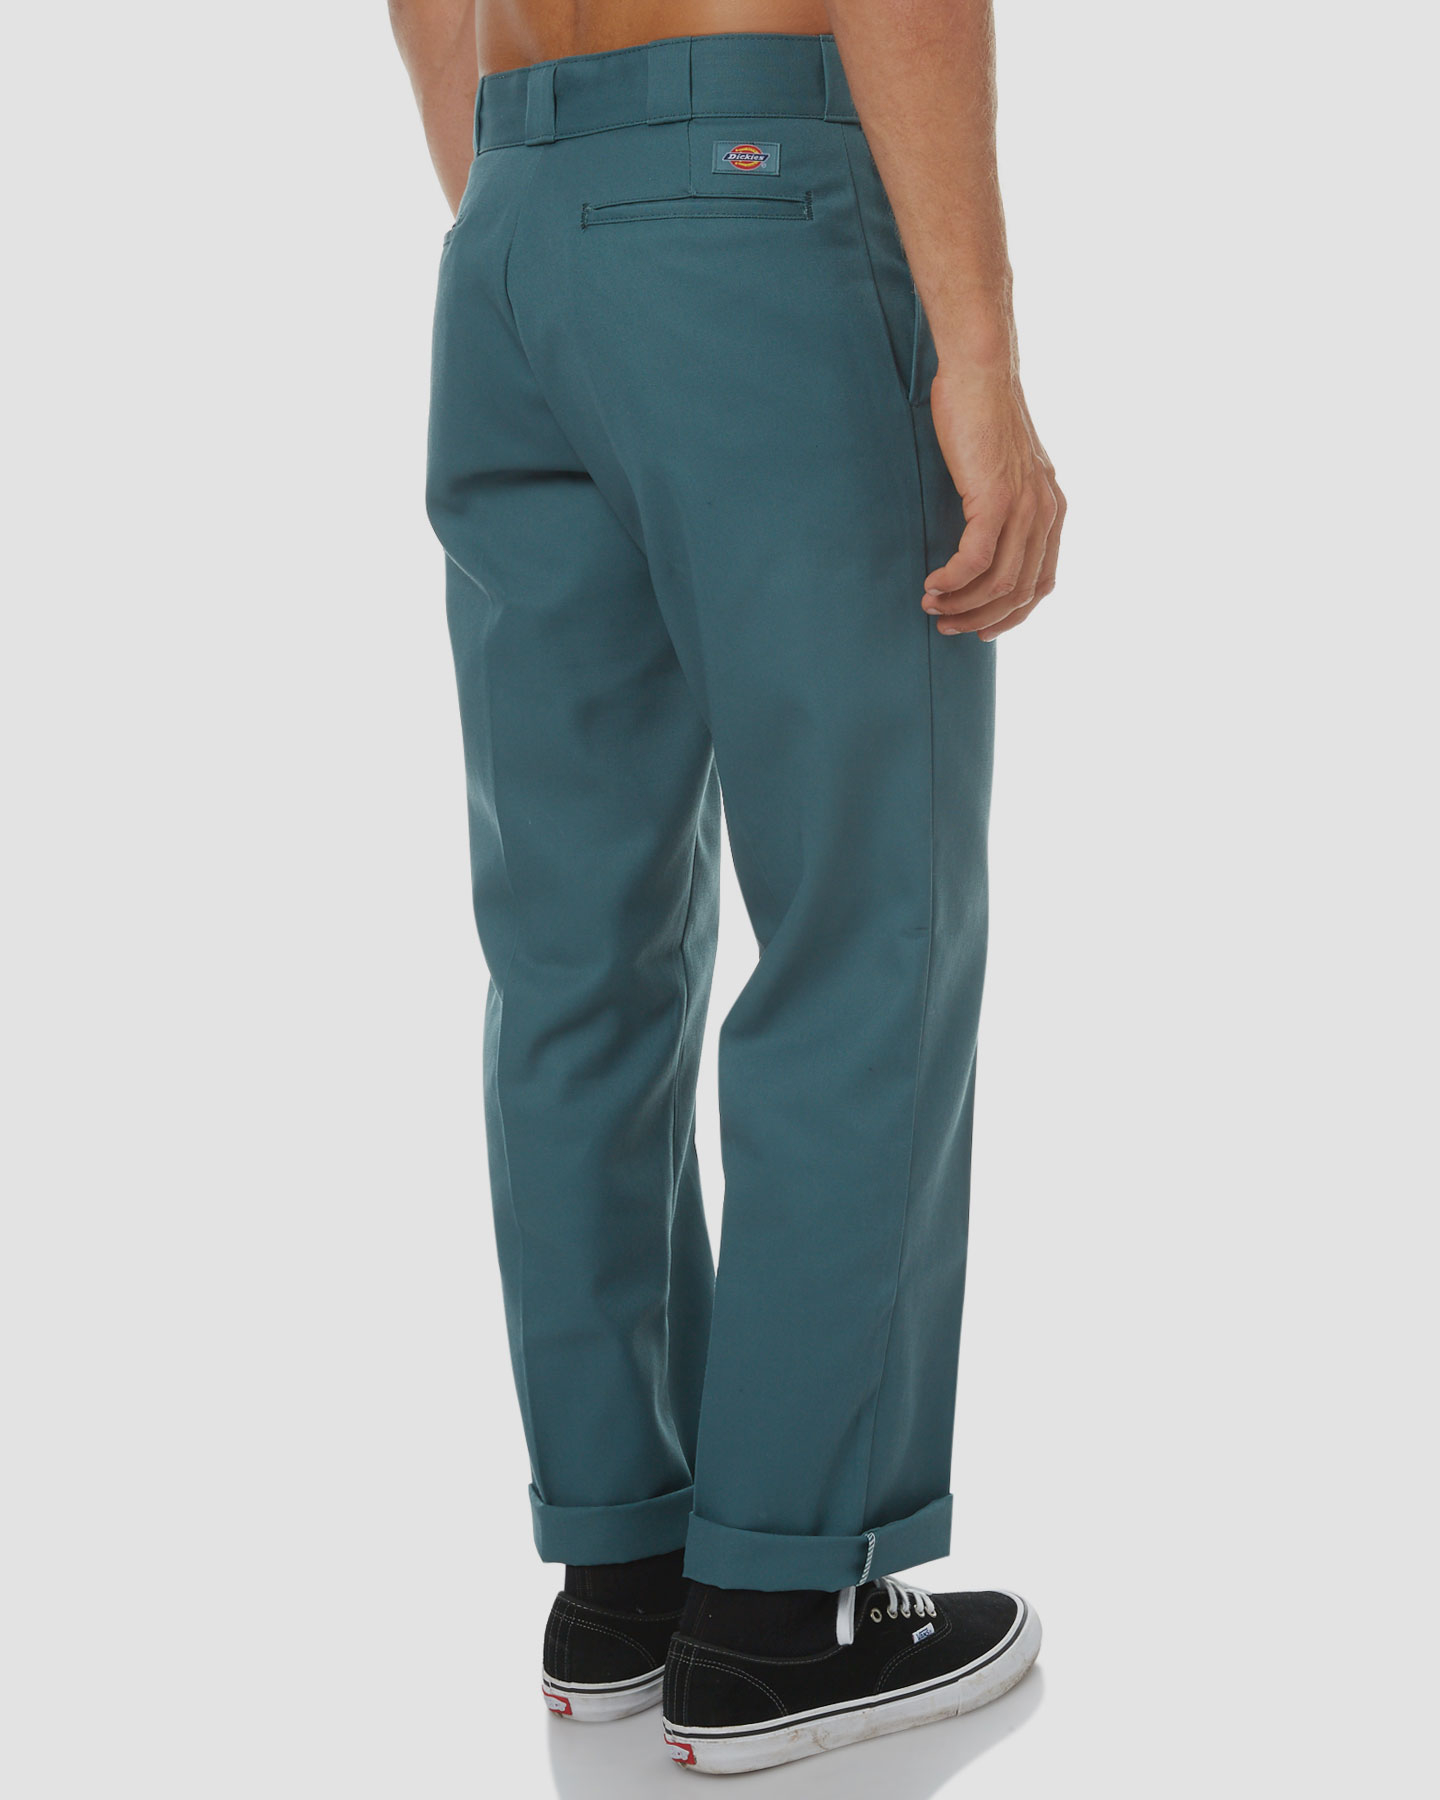 Dickies 874 Original Fit Work Pant Lincoln Green SurfStitch